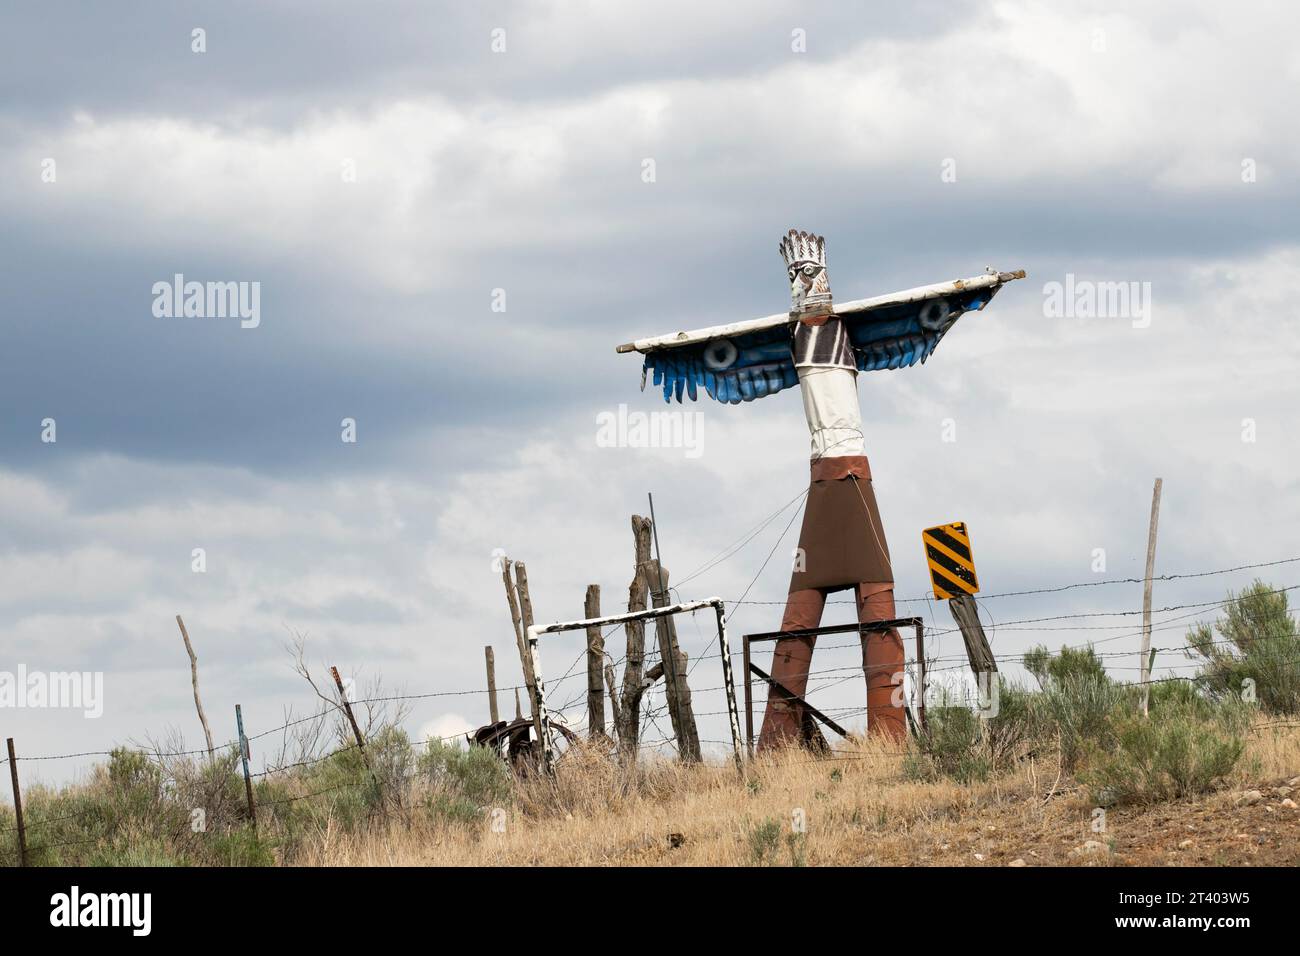 Native American sign in Colorado reservation near the highway road Stock Photo